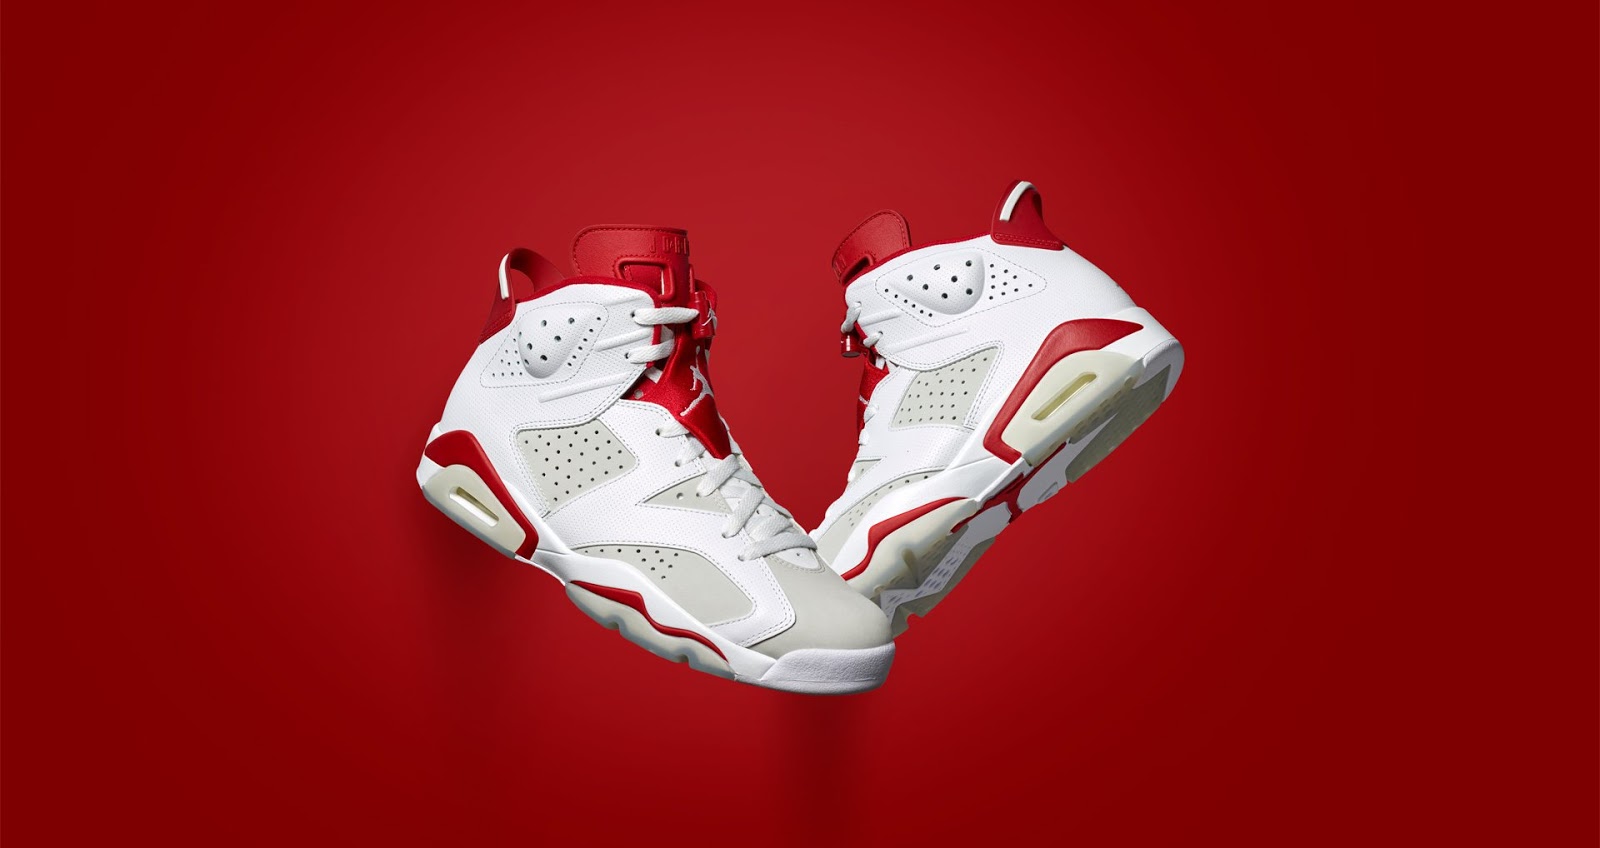 Here's How You Can Buy the Air Jordan 6 Retro Alternate Online